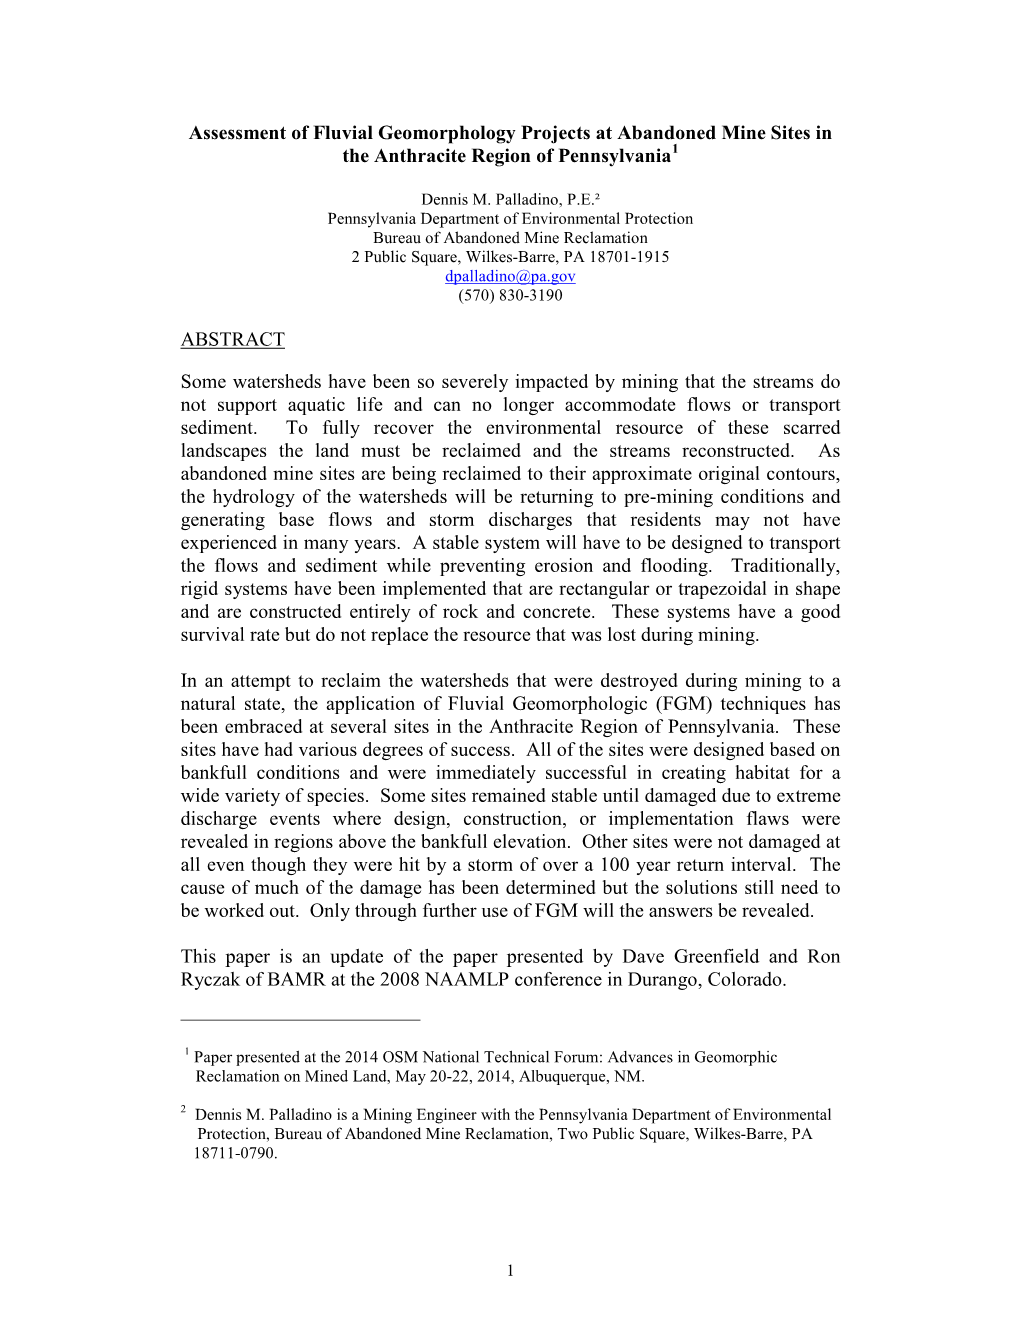 Paper Is an Update of the Paper Presented by Dave Greenfield and Ron Ryczak of BAMR at the 2008 NAAMLP Conference in Durango, Colorado